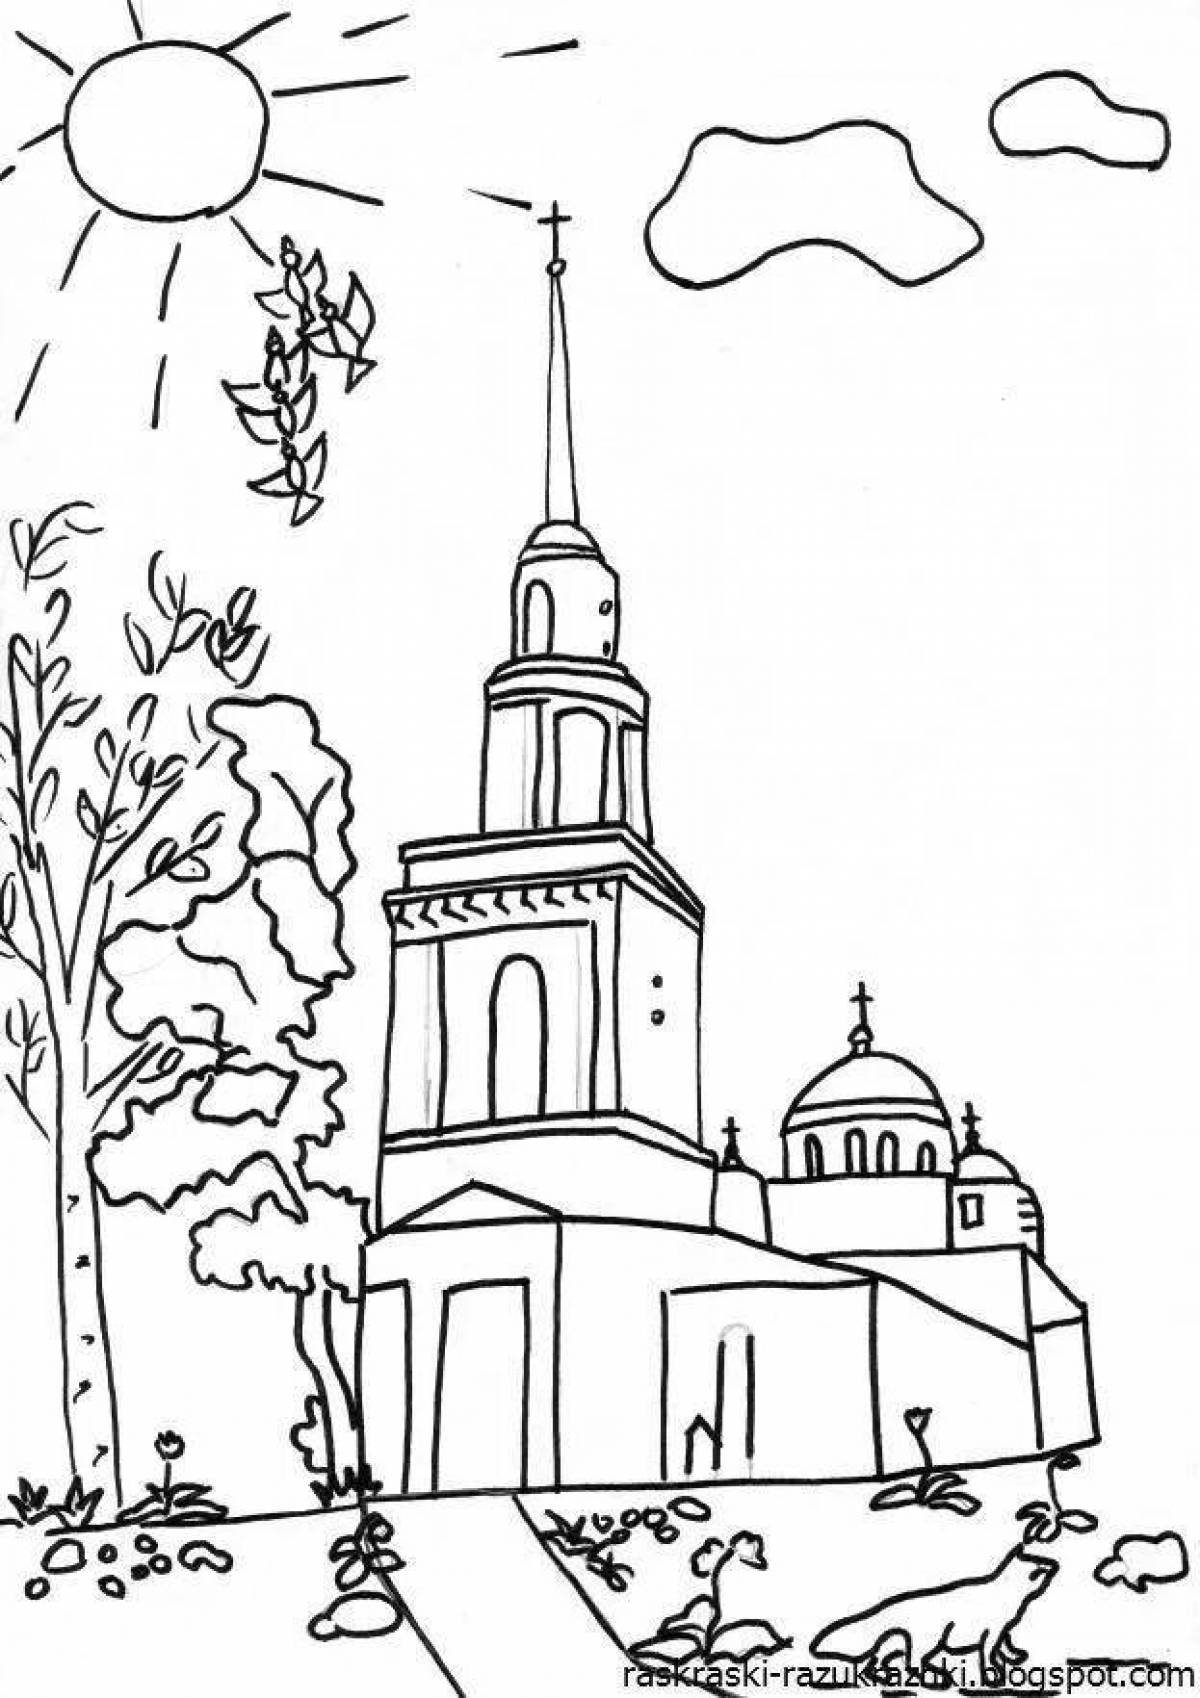 Coloring page inviting homeland